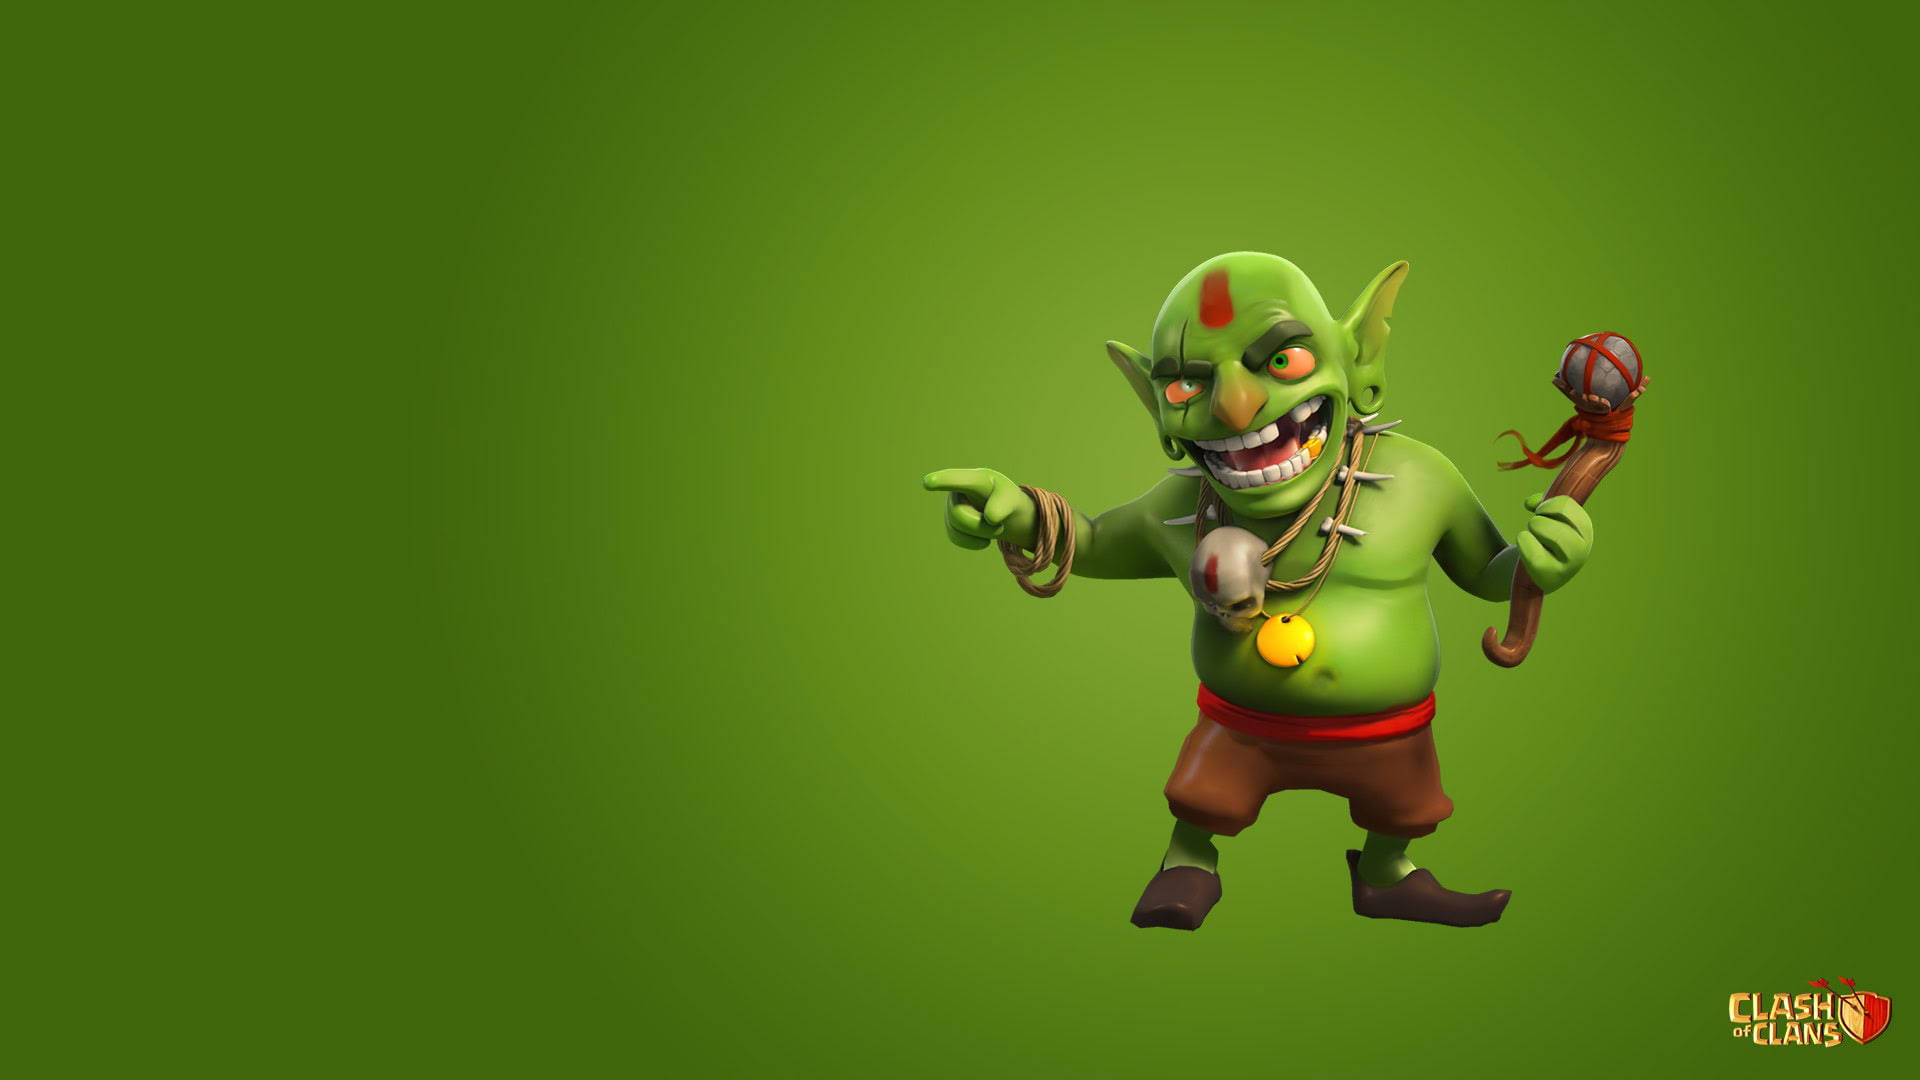 Goblin's Mighty Laugh in Clash Of Clans Wallpaper